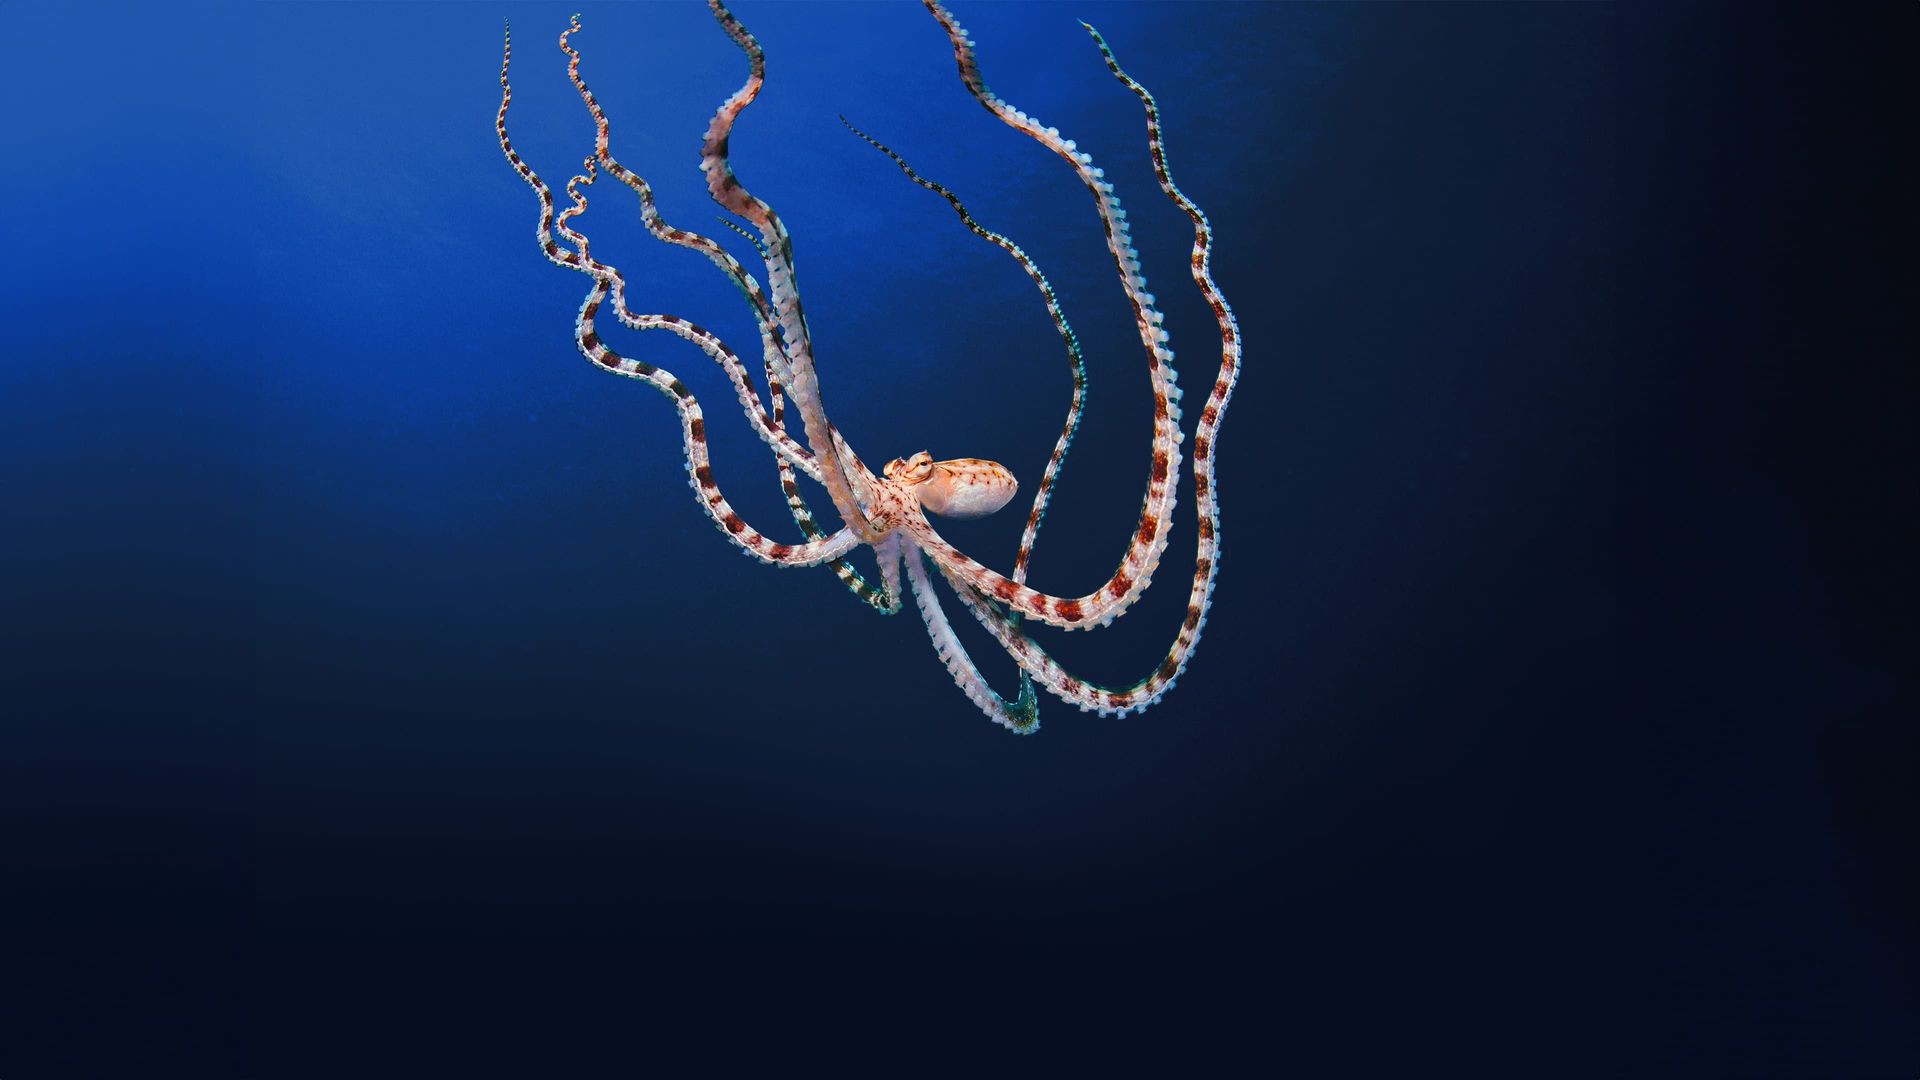 Secrets of the Octopus background